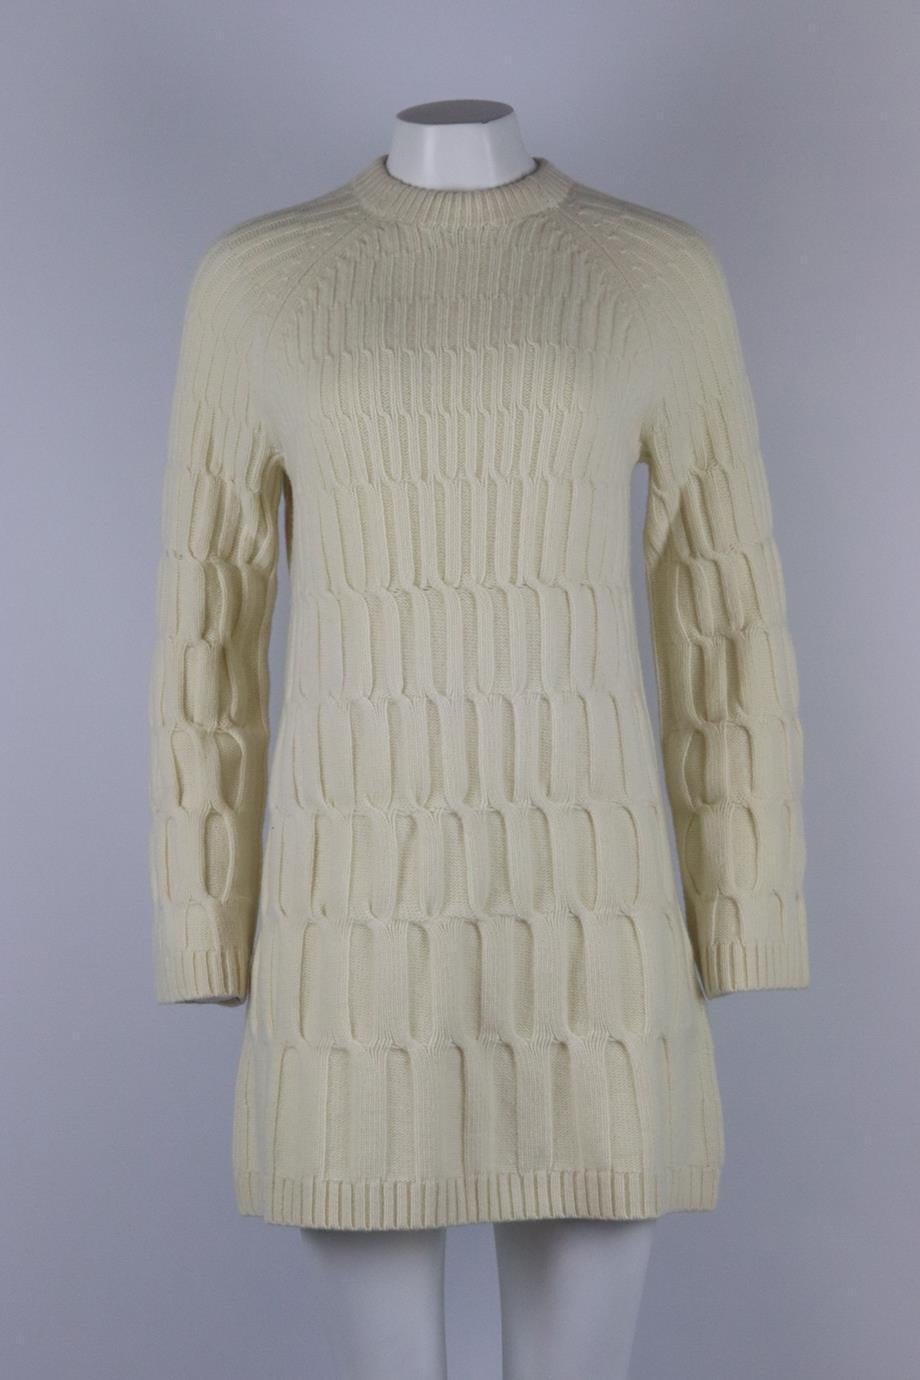 Theory ribbed wool and cashmere blend mini dress. Cream. Long sleeve, crewneck. Slips on. 90% Wool, 10% cashmere. Size: Small (UK 8, US 4, FR 36, IT 40). Bust: 38 in. Waist: 36 in. Hips: 41 in. Length: 32 in. Very good condition - As new condition,